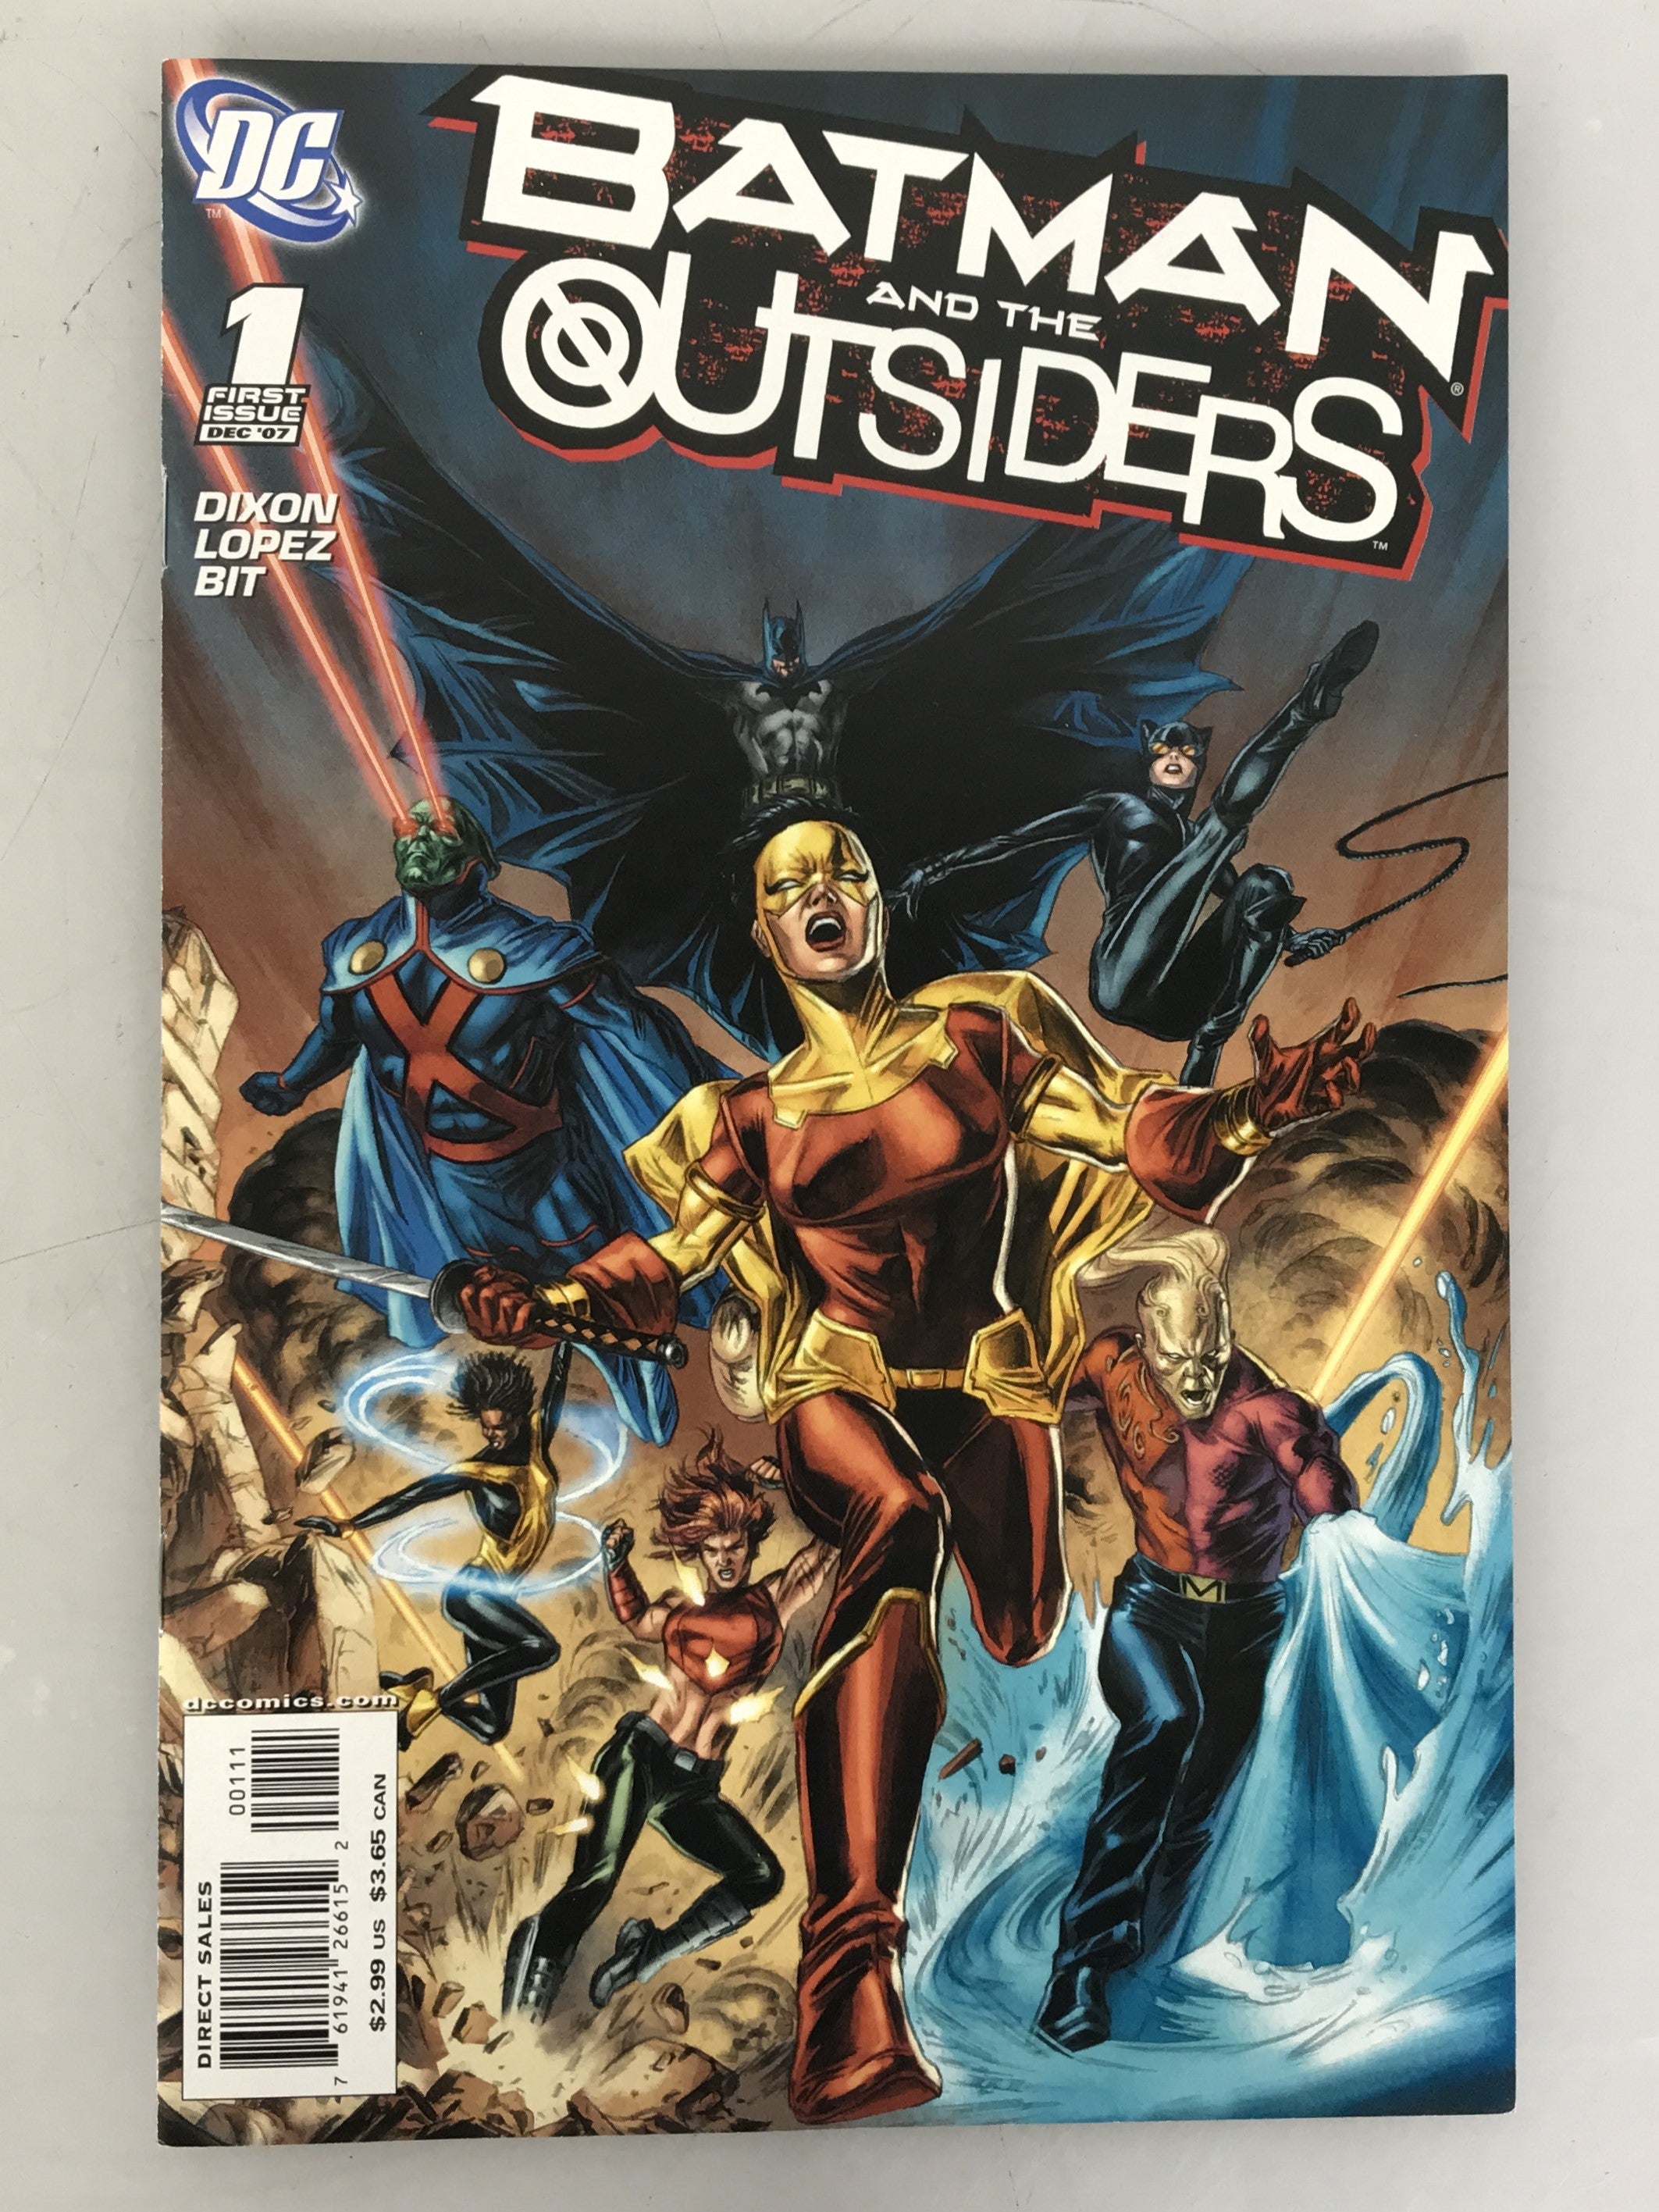 Batman and The Outsiders 1-5 2007-2008